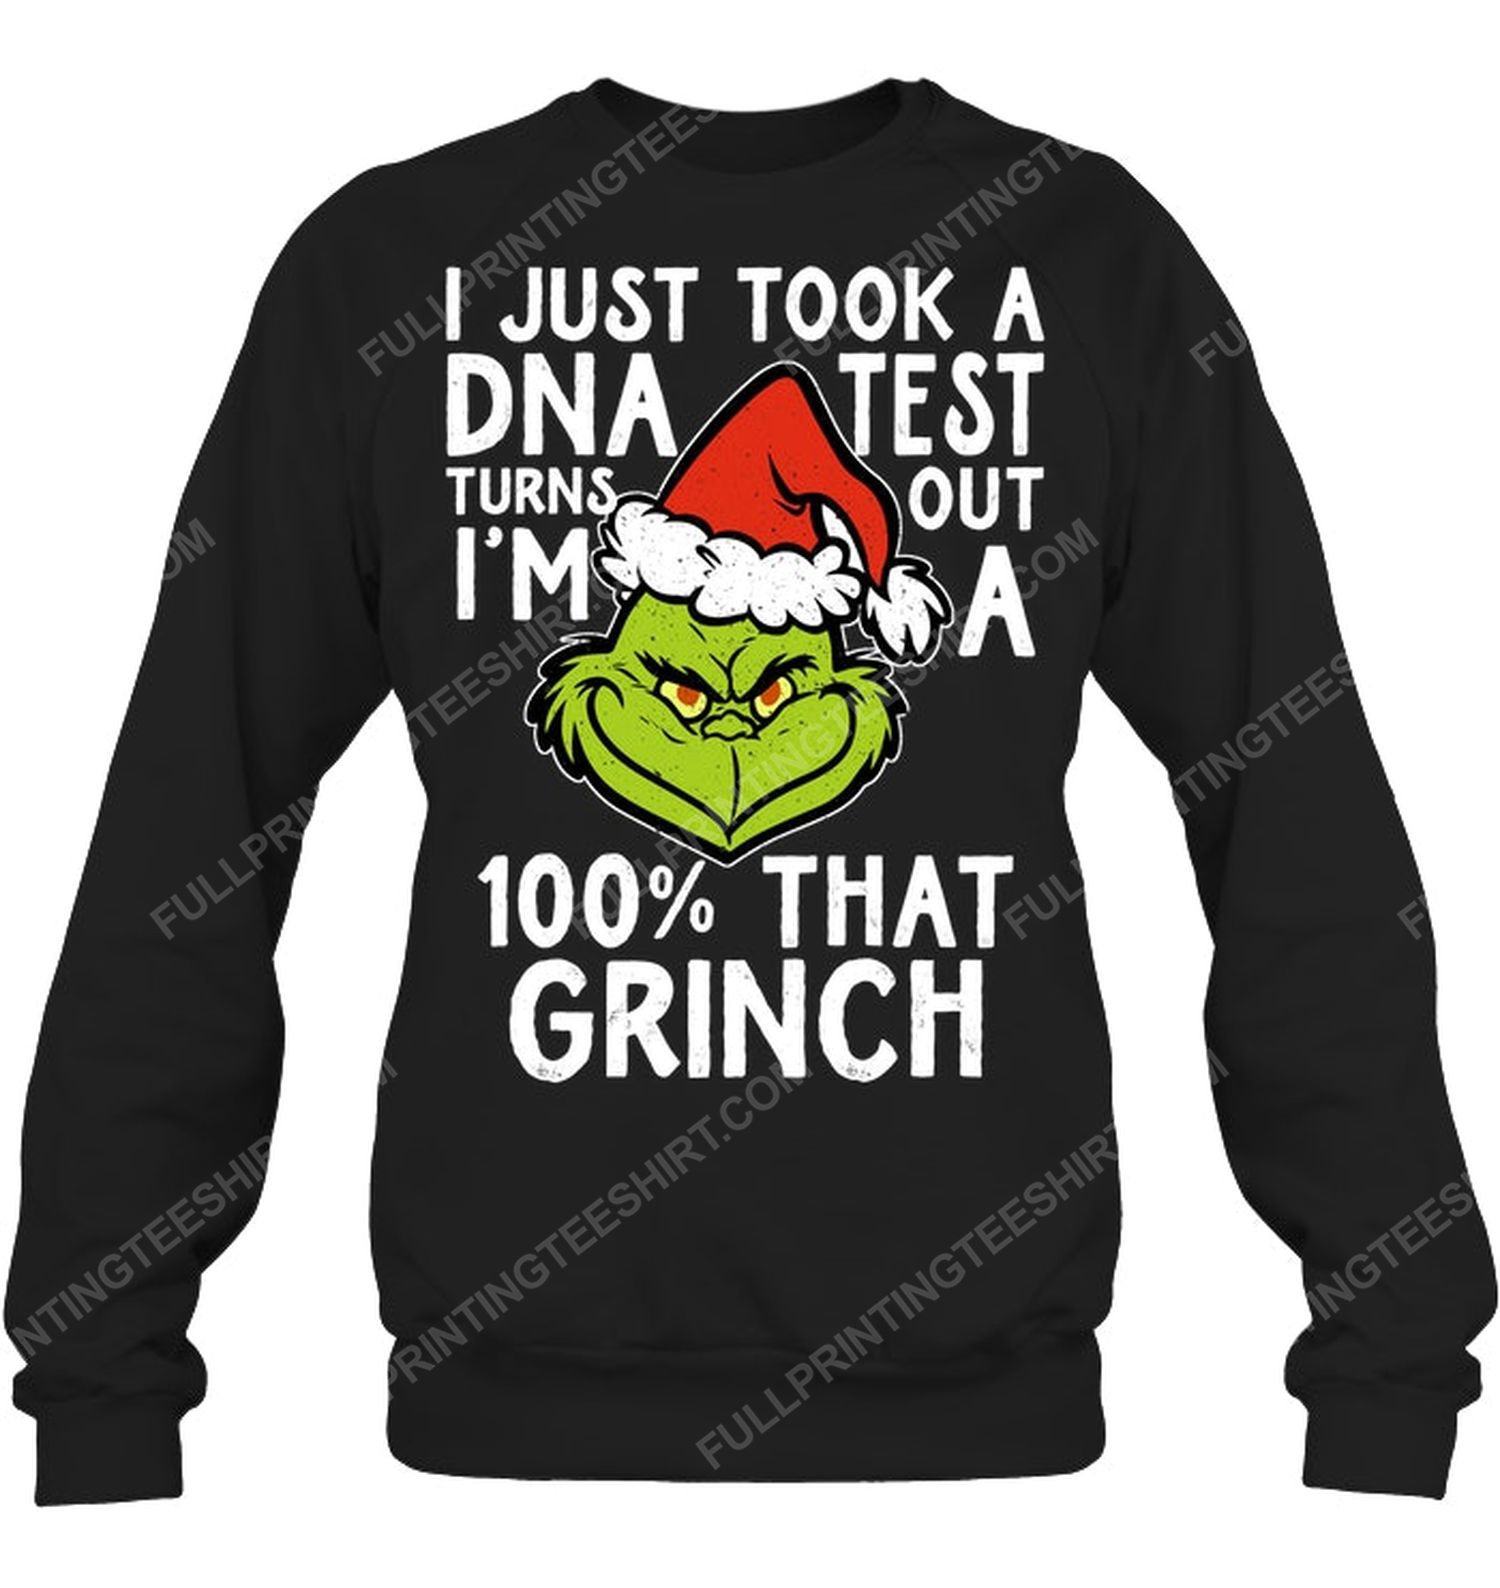 I just took a dna test turns out i'm 100 that grinch sweatshirt